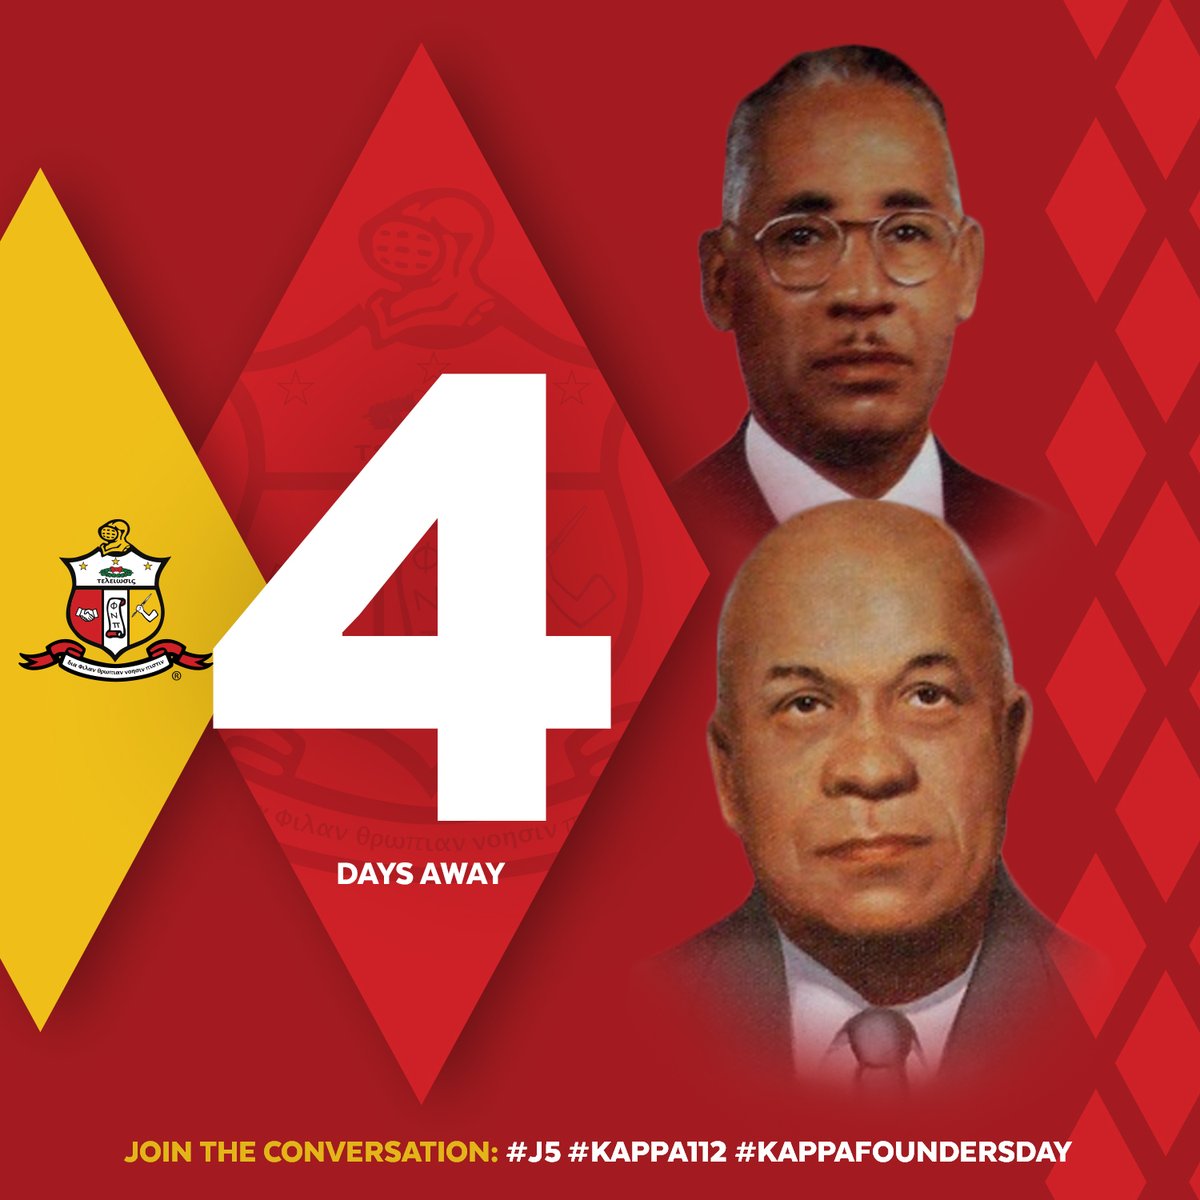 Kappa Alpha Psi Fraternity Inc On Twitter J5 In 4 Ready To